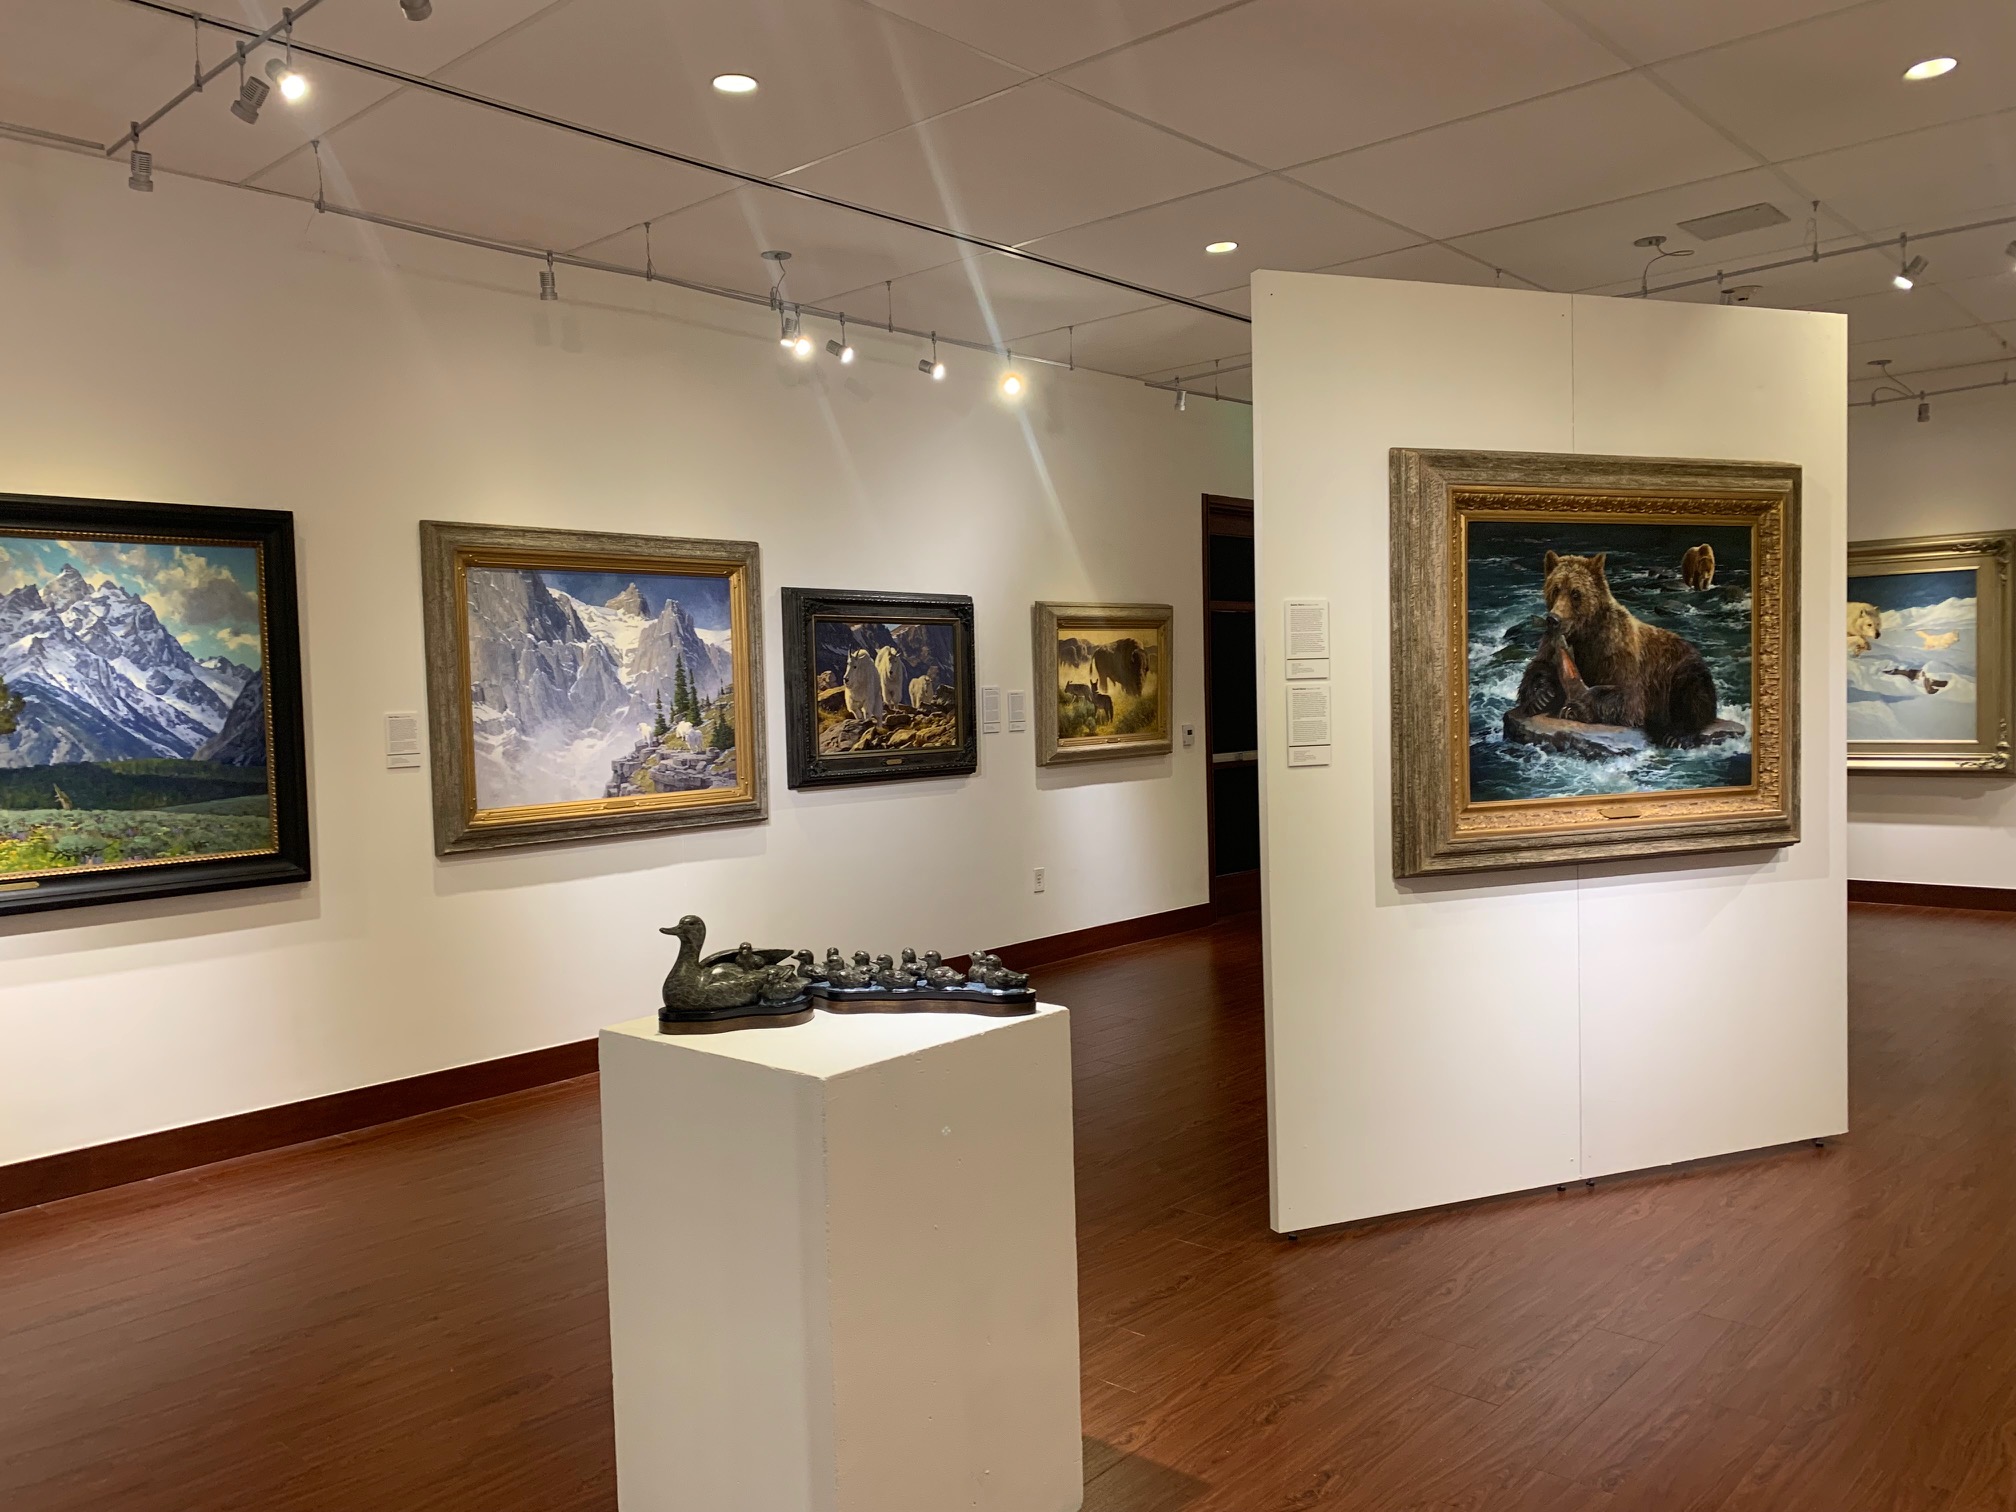 Image of the Huntley Gallery showing "The life and terrain of the wild West" text didactic and artwork